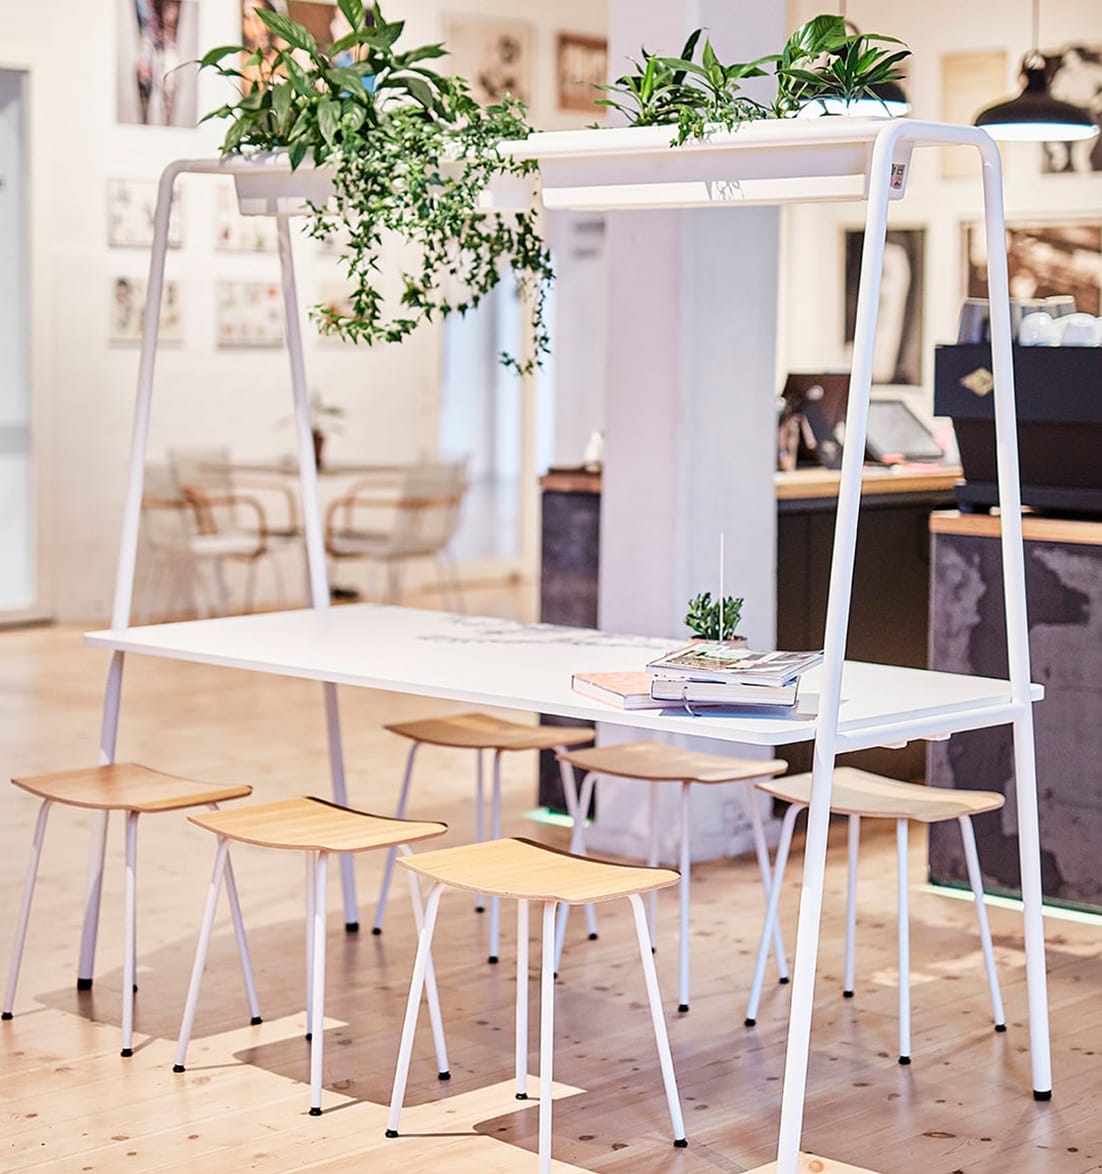 A white community table and chairs in a room with plants. FourReal A 74